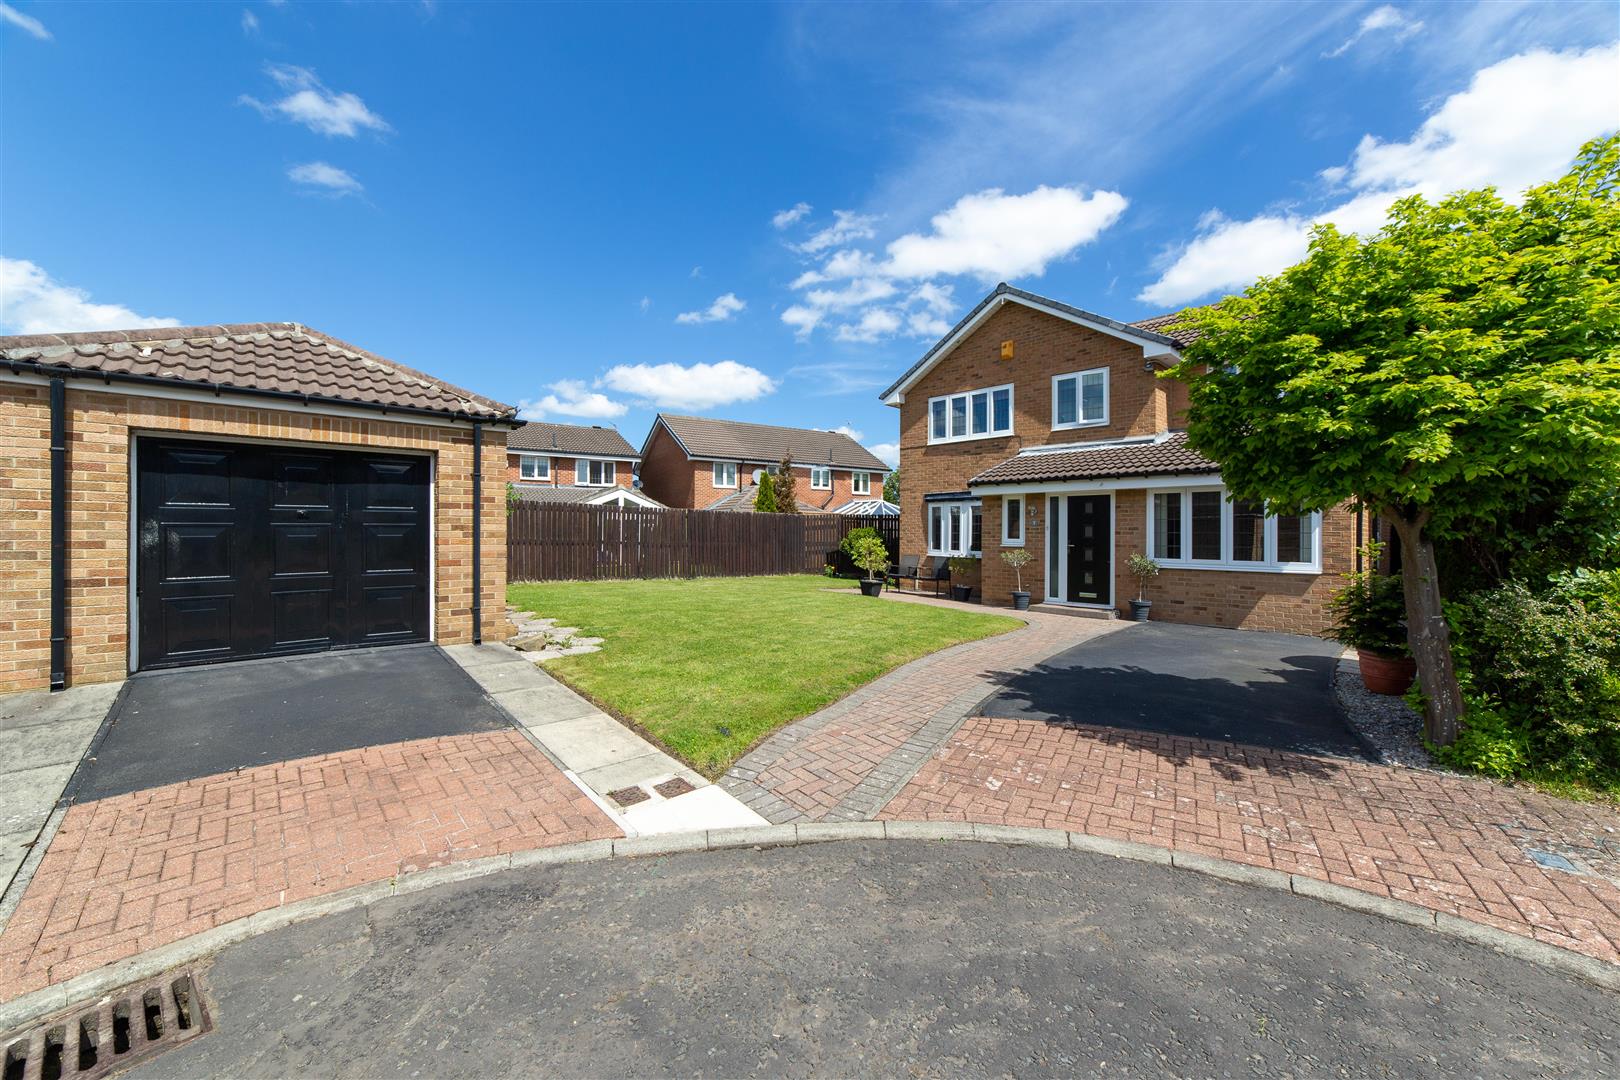 4 bed detached house for sale in Dunmoor Close, Newcastle Upon Tyne, NE3 